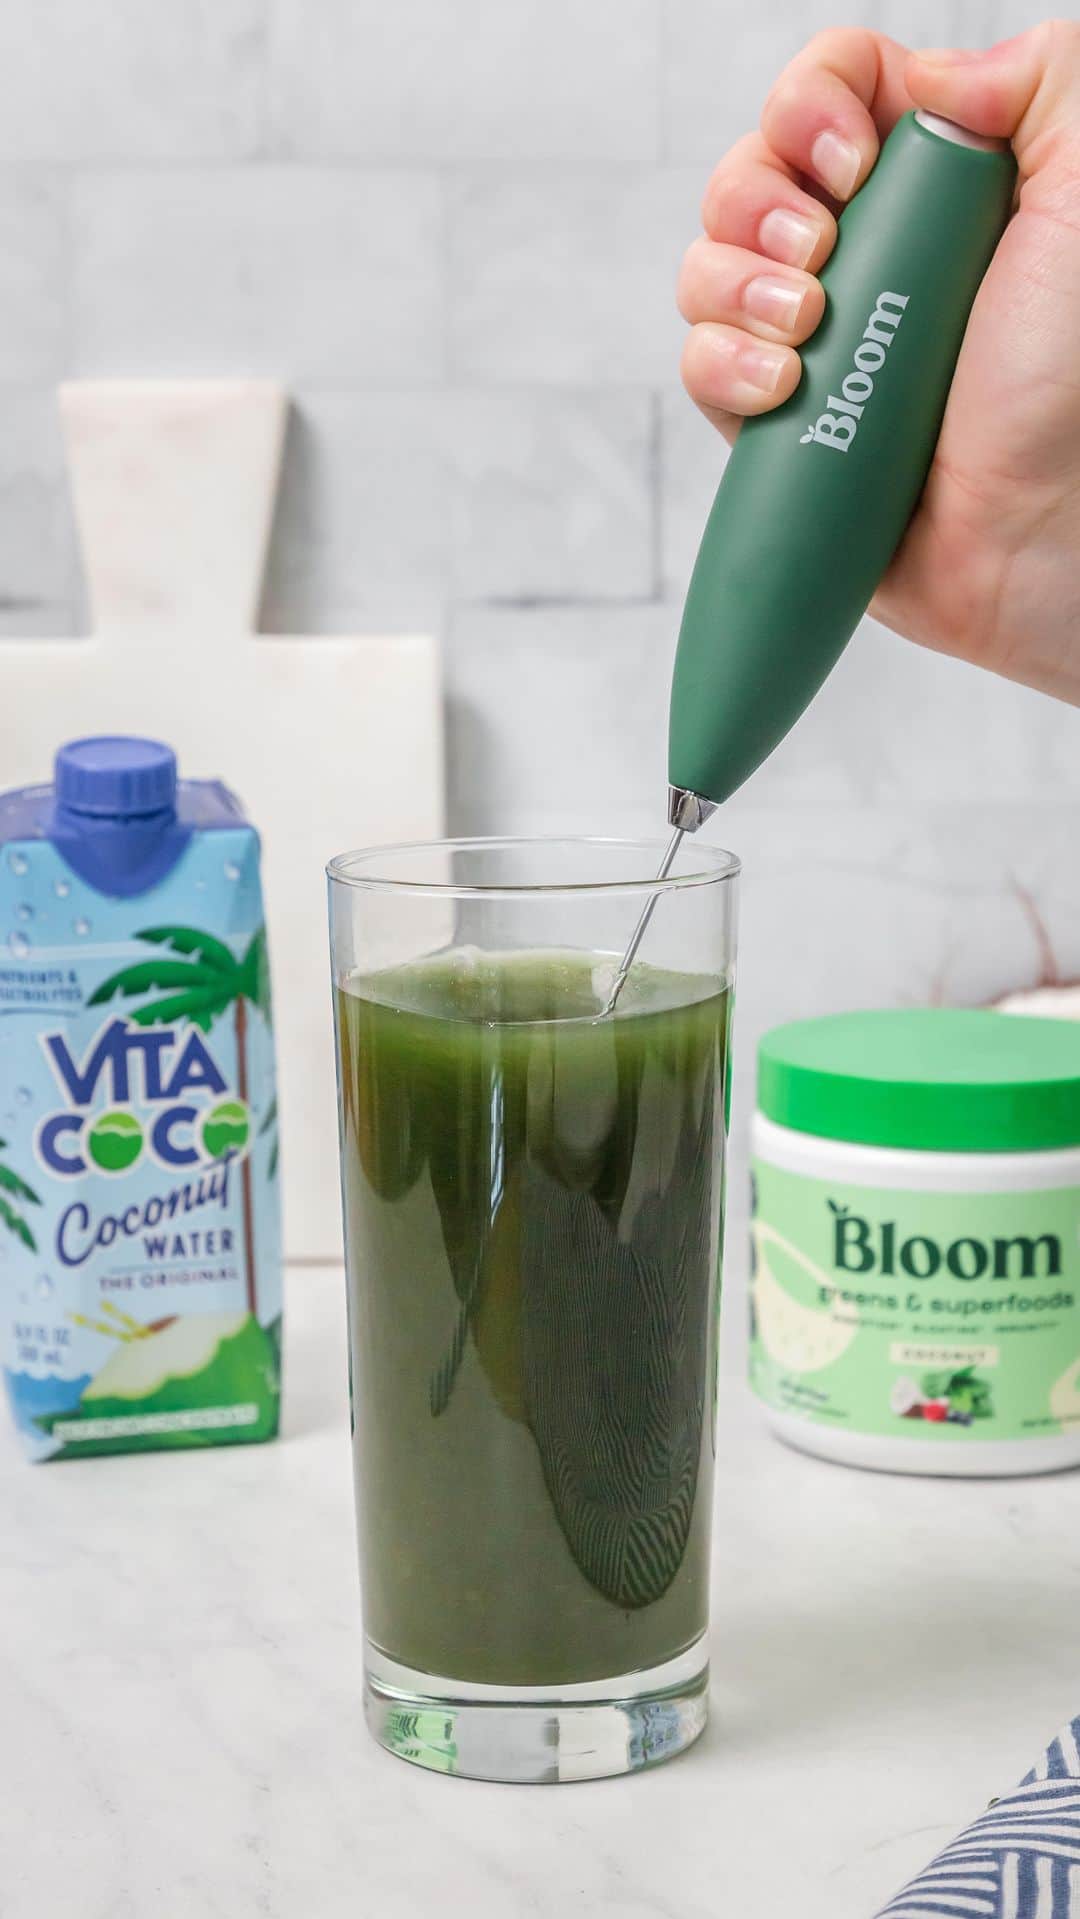 Vita Coco Coconut Waterのインスタグラム：「Daily greens + antioxidants + electrolytes + vitamins + nutrients = all your daily essentials, mixing perfectly in one glass. Plus, you’ll be hydrated. And did we mention that greens and coconuts are impeccable flavor complements? @bloomsupps, we just go together  🥬🥥💚」